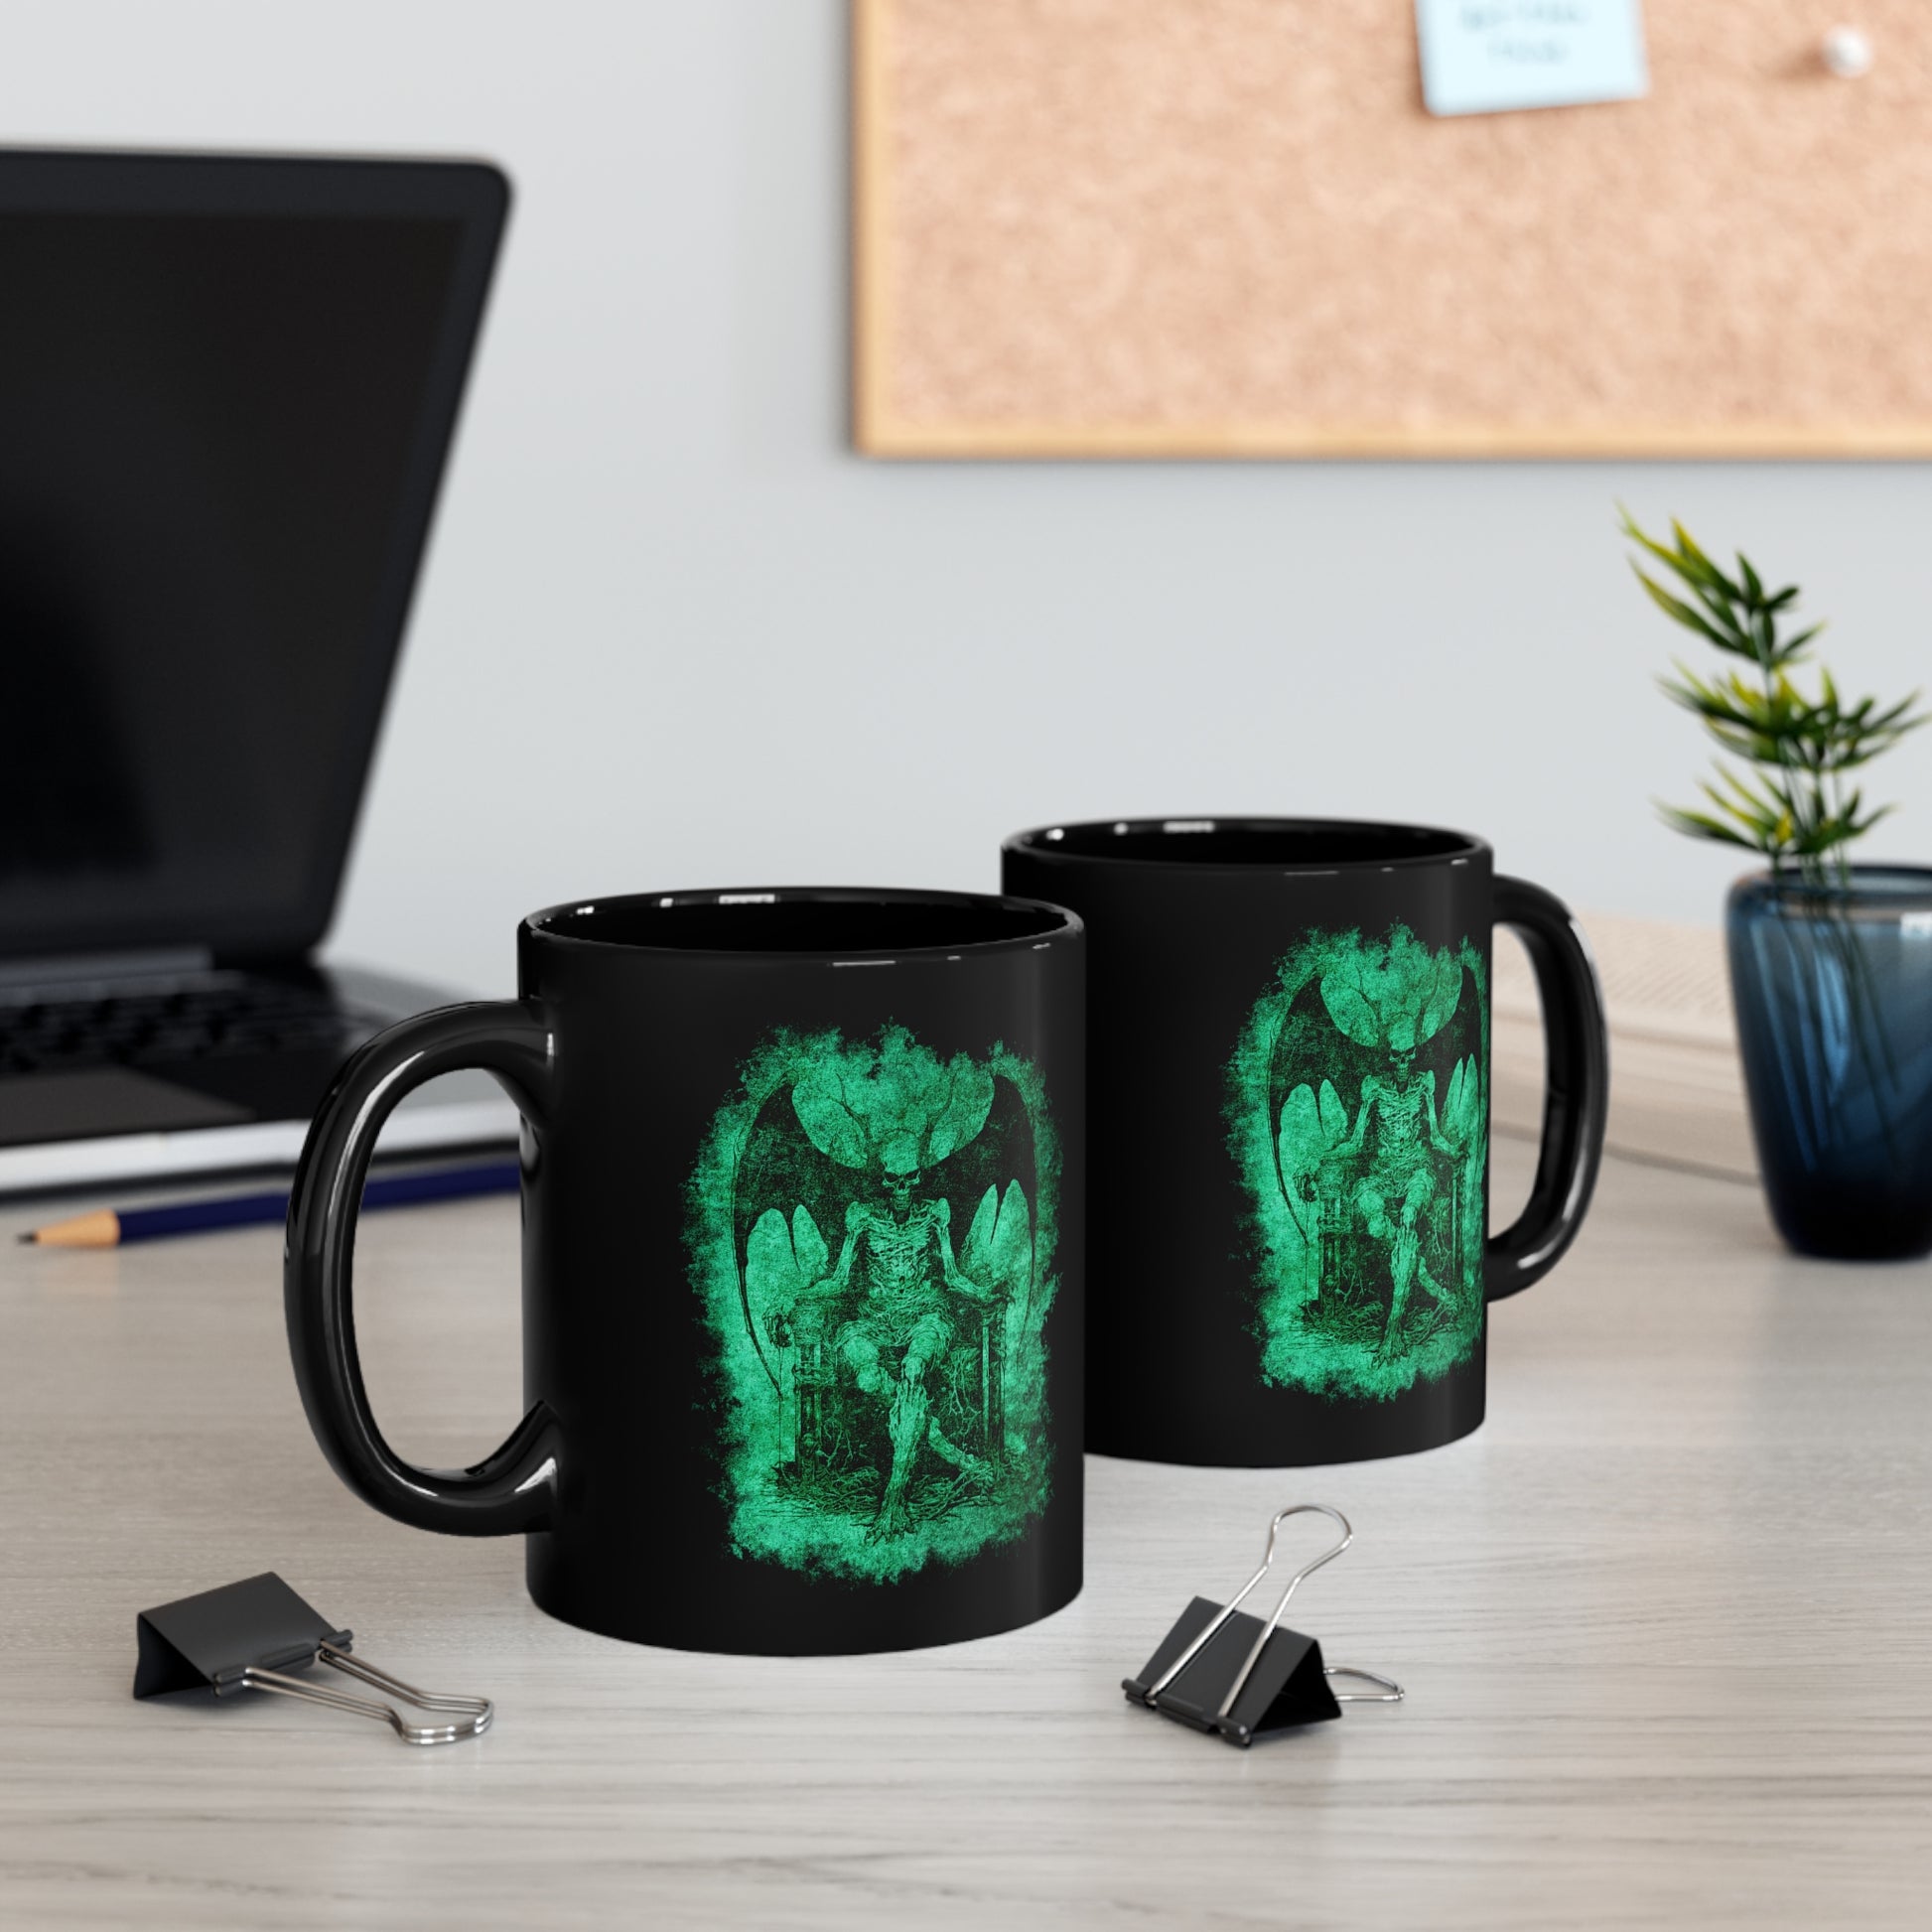 Mug Devil on his Throne in Hell in Green - Frogos Design